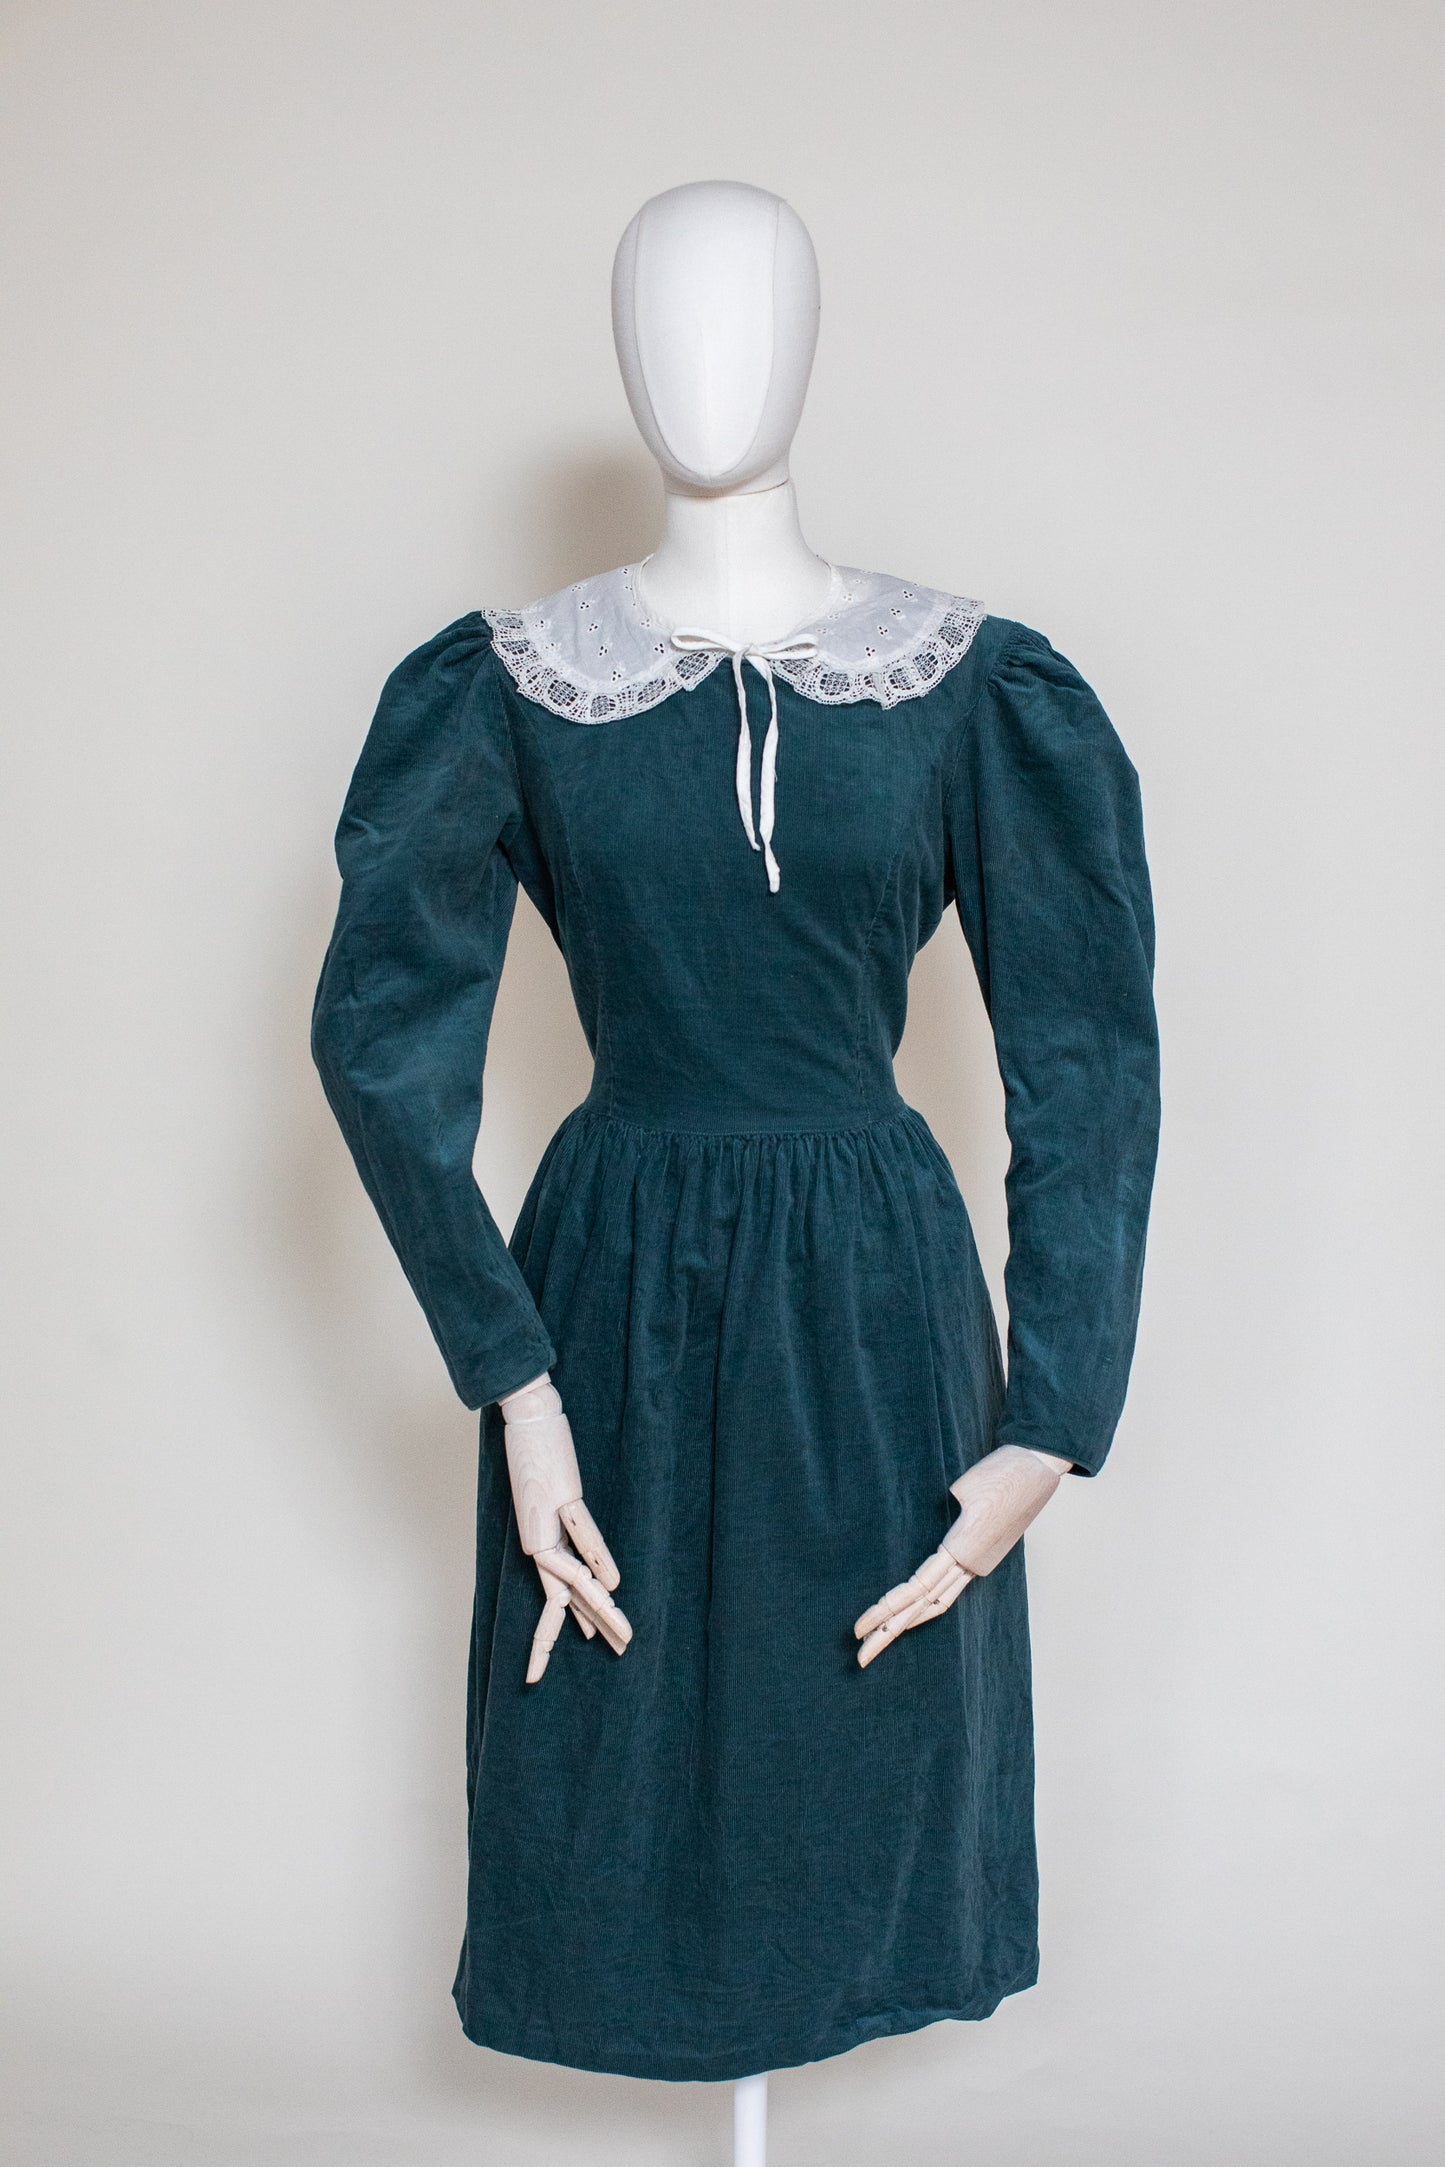 1980s Vintage Laura Ashley green cord dress with a detachable collar - Size M